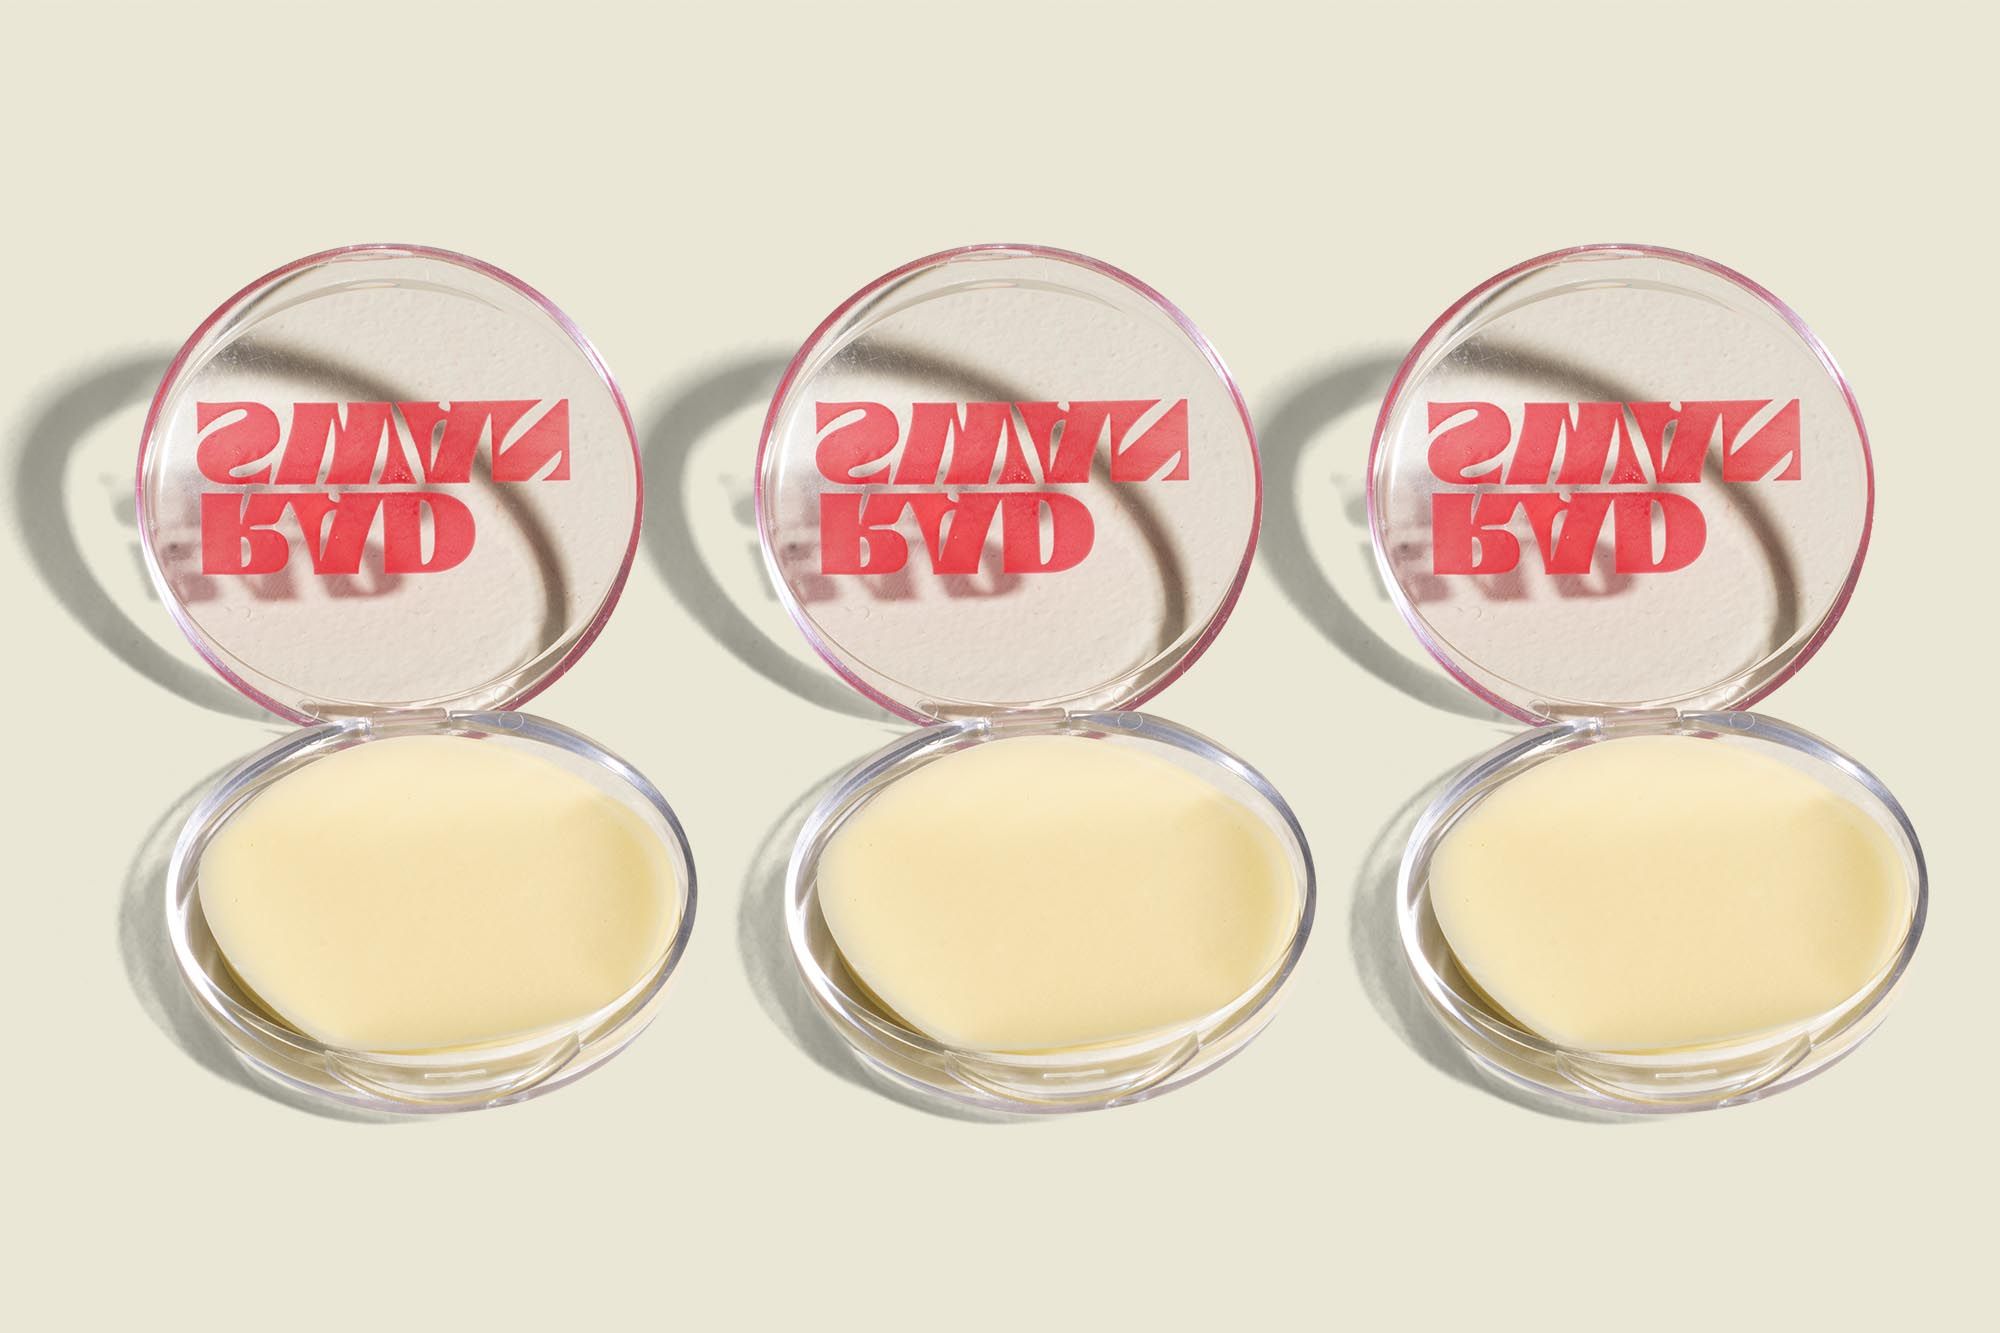 Beauty product compact